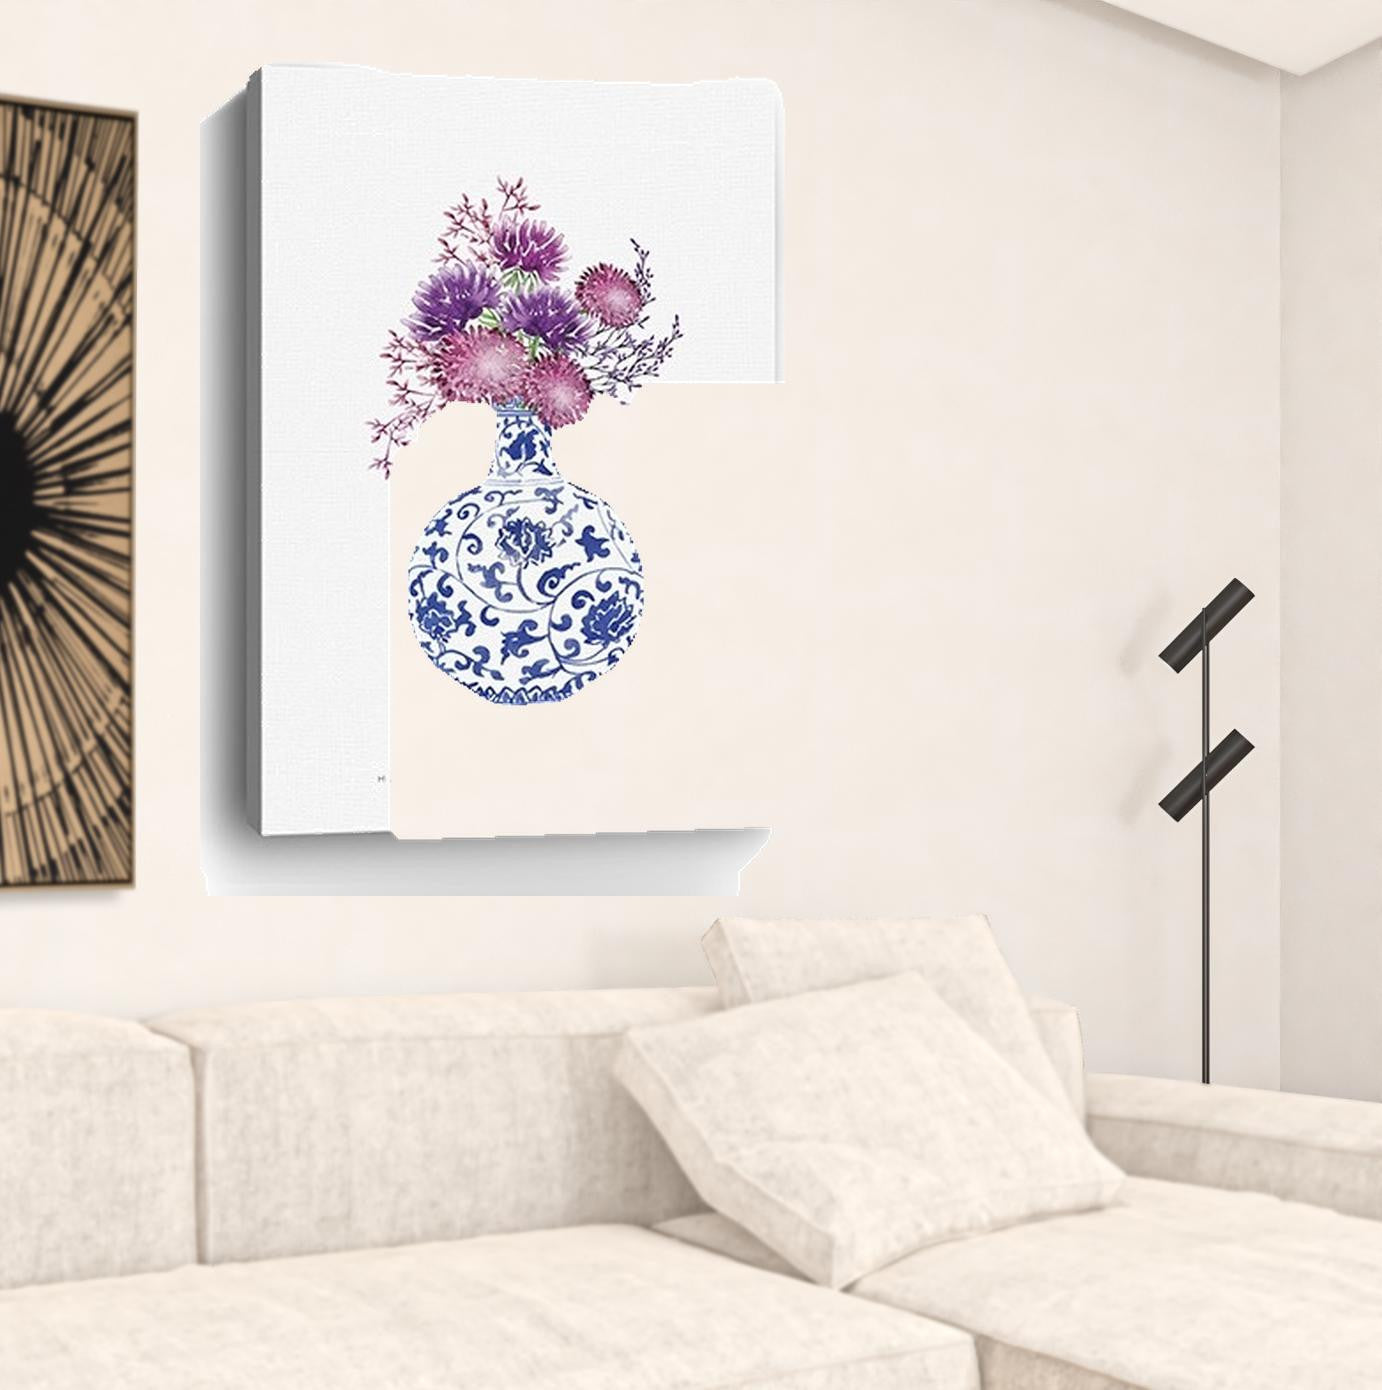 24" x 16" Blue and White Happiness Floral Vase Canvas Wall Art